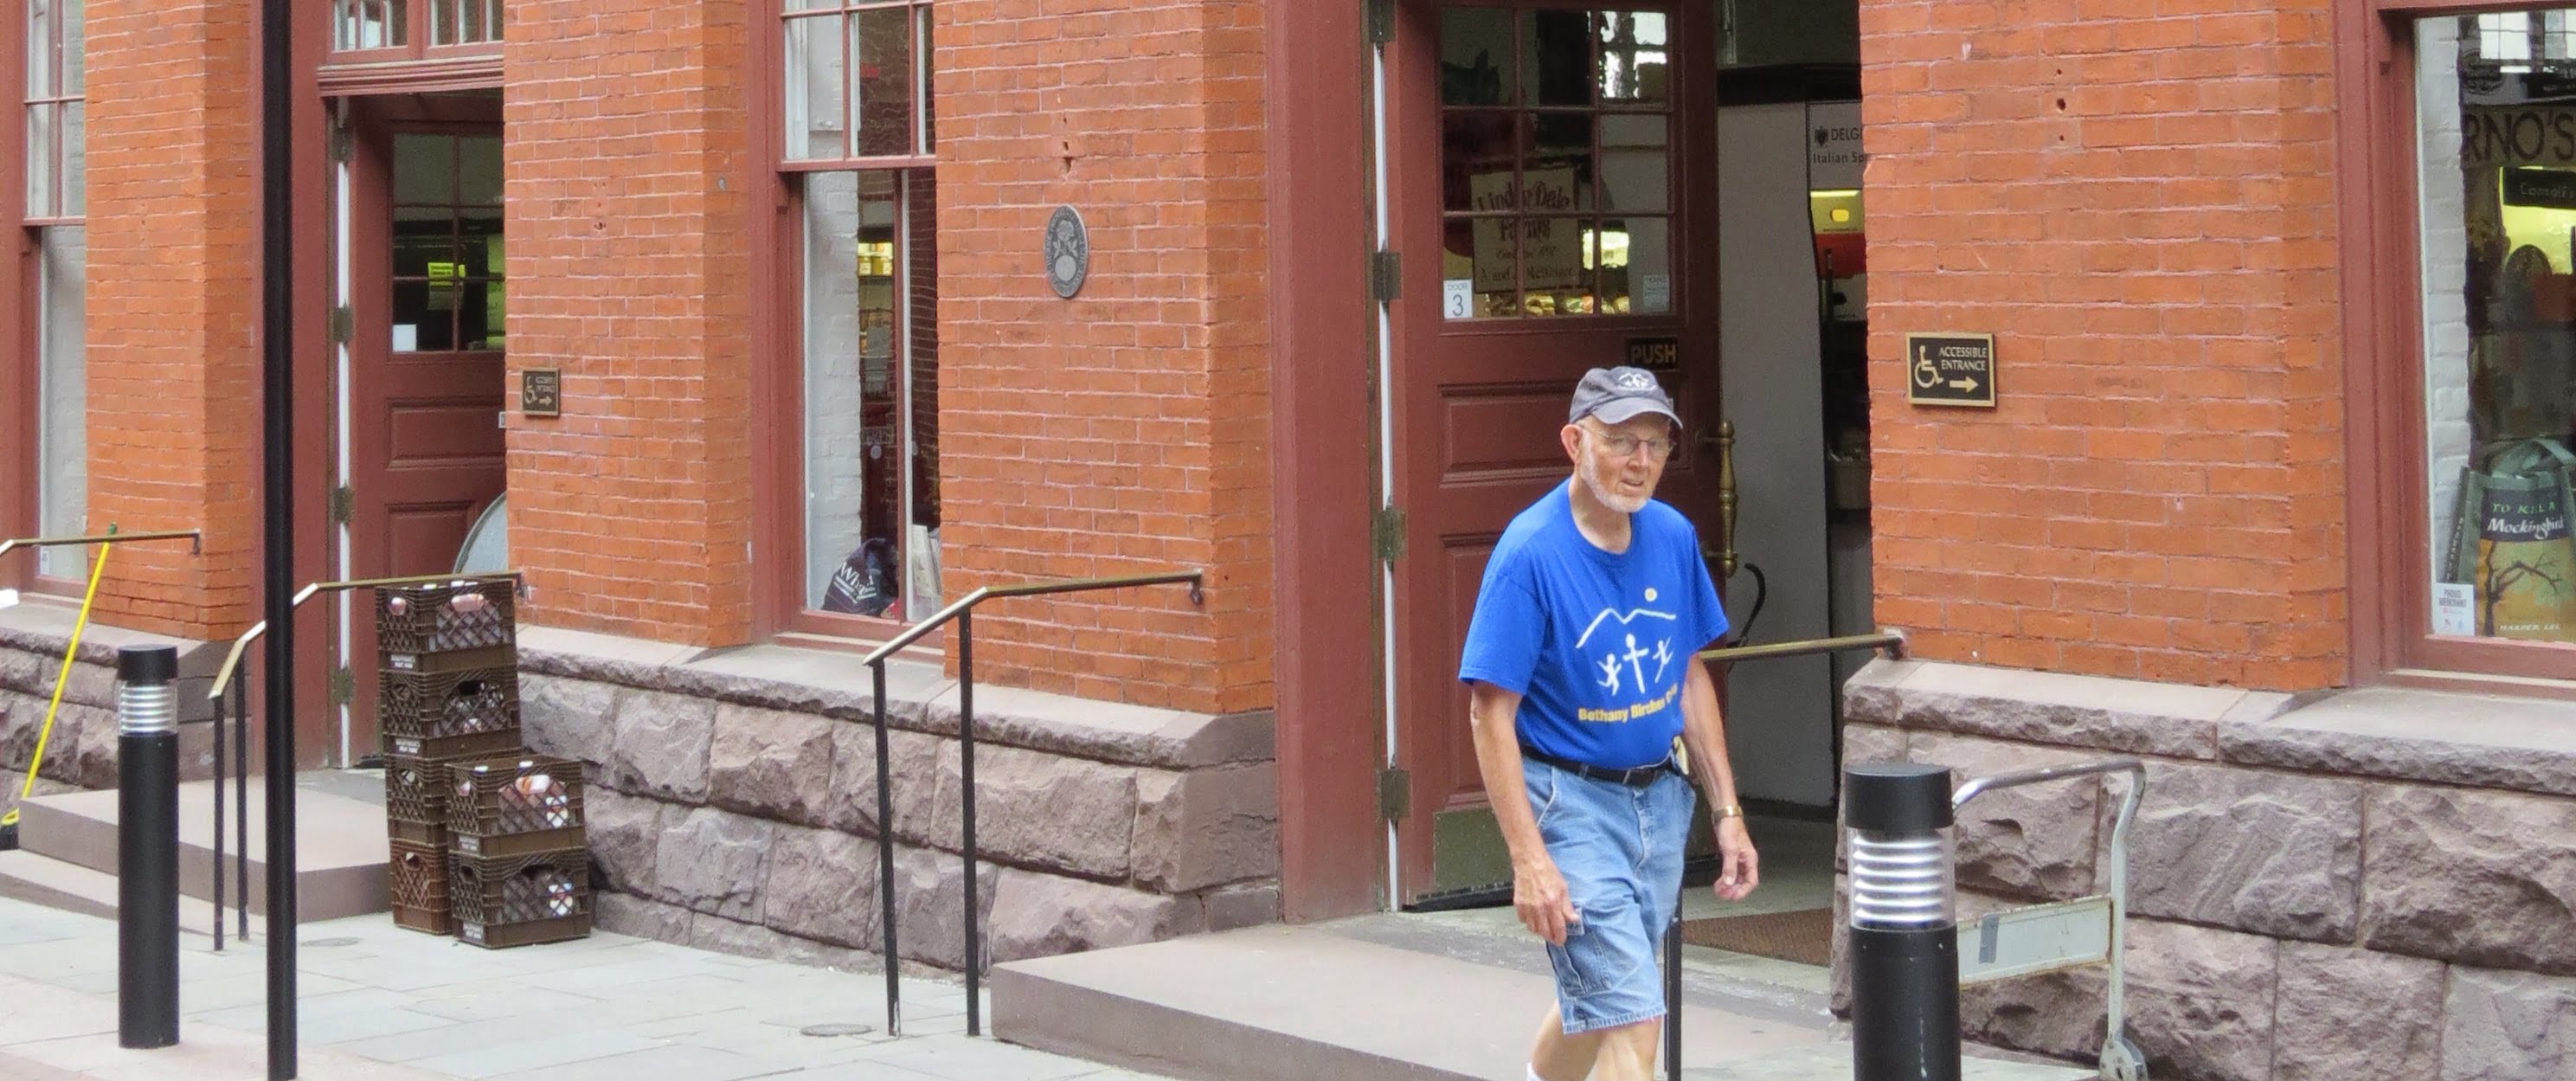 Bob Walks For the Pavilion Project: Central Market and Pavi History